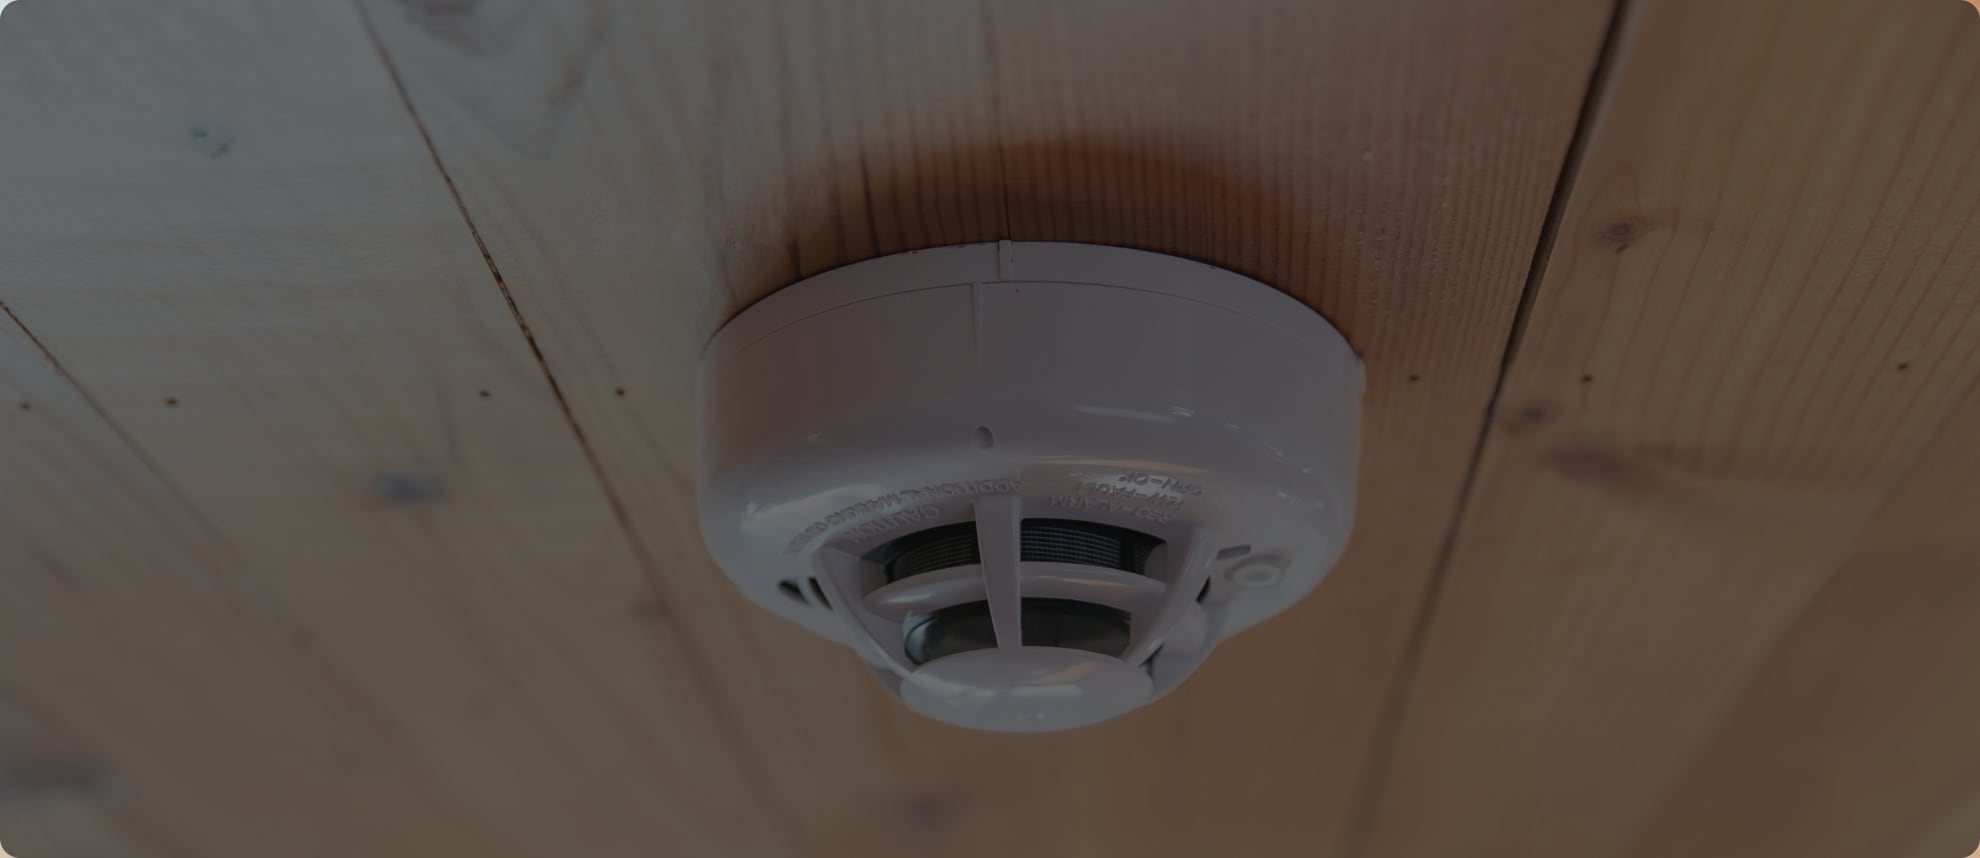 Vivint Monitored Smoke Alarm in New Haven